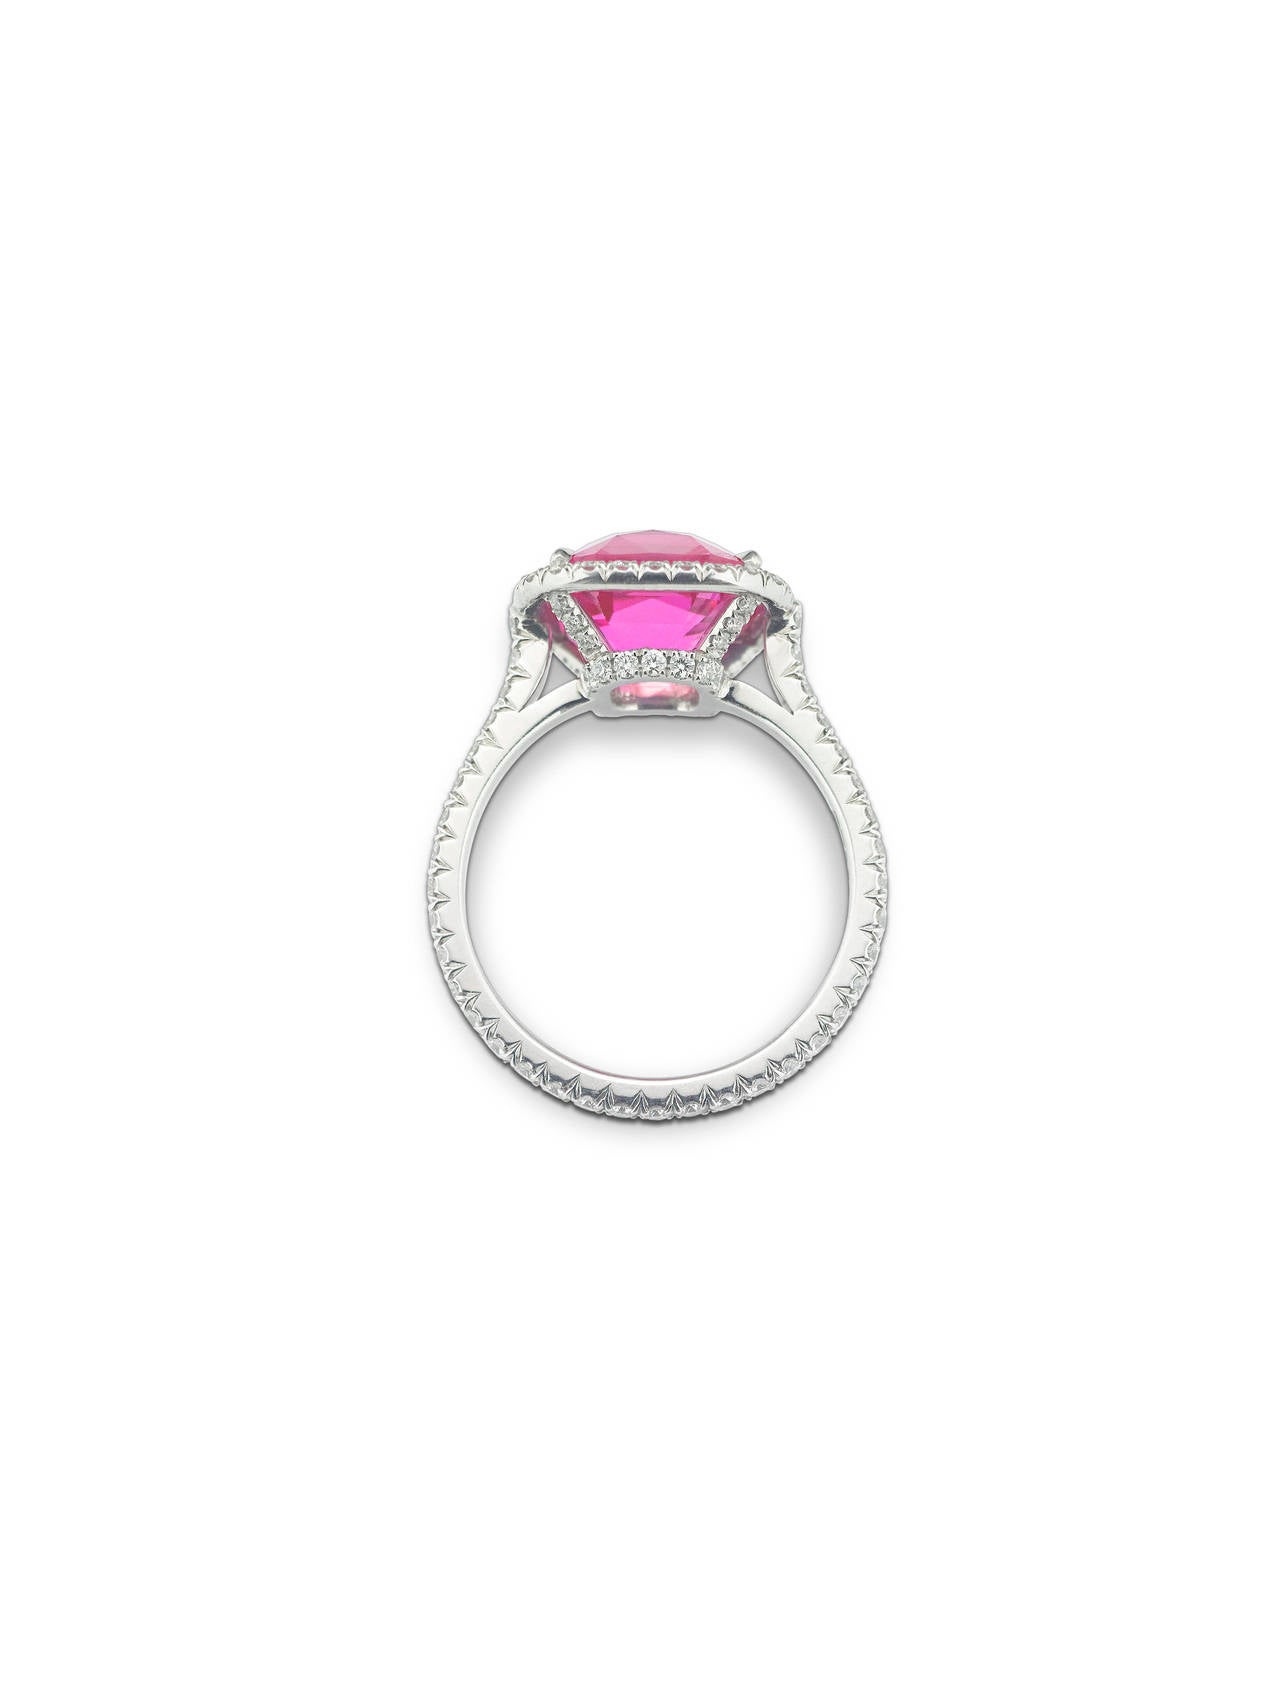 An absolutely enchanting and all natural cushion-cut pink sapphire rests among 0.78 glittering carats of micropave-set diamonds in this extraordinary ring. Boasting 4.88 carats and a magnificent rosy hue, this stone is a true beauty. Displaying